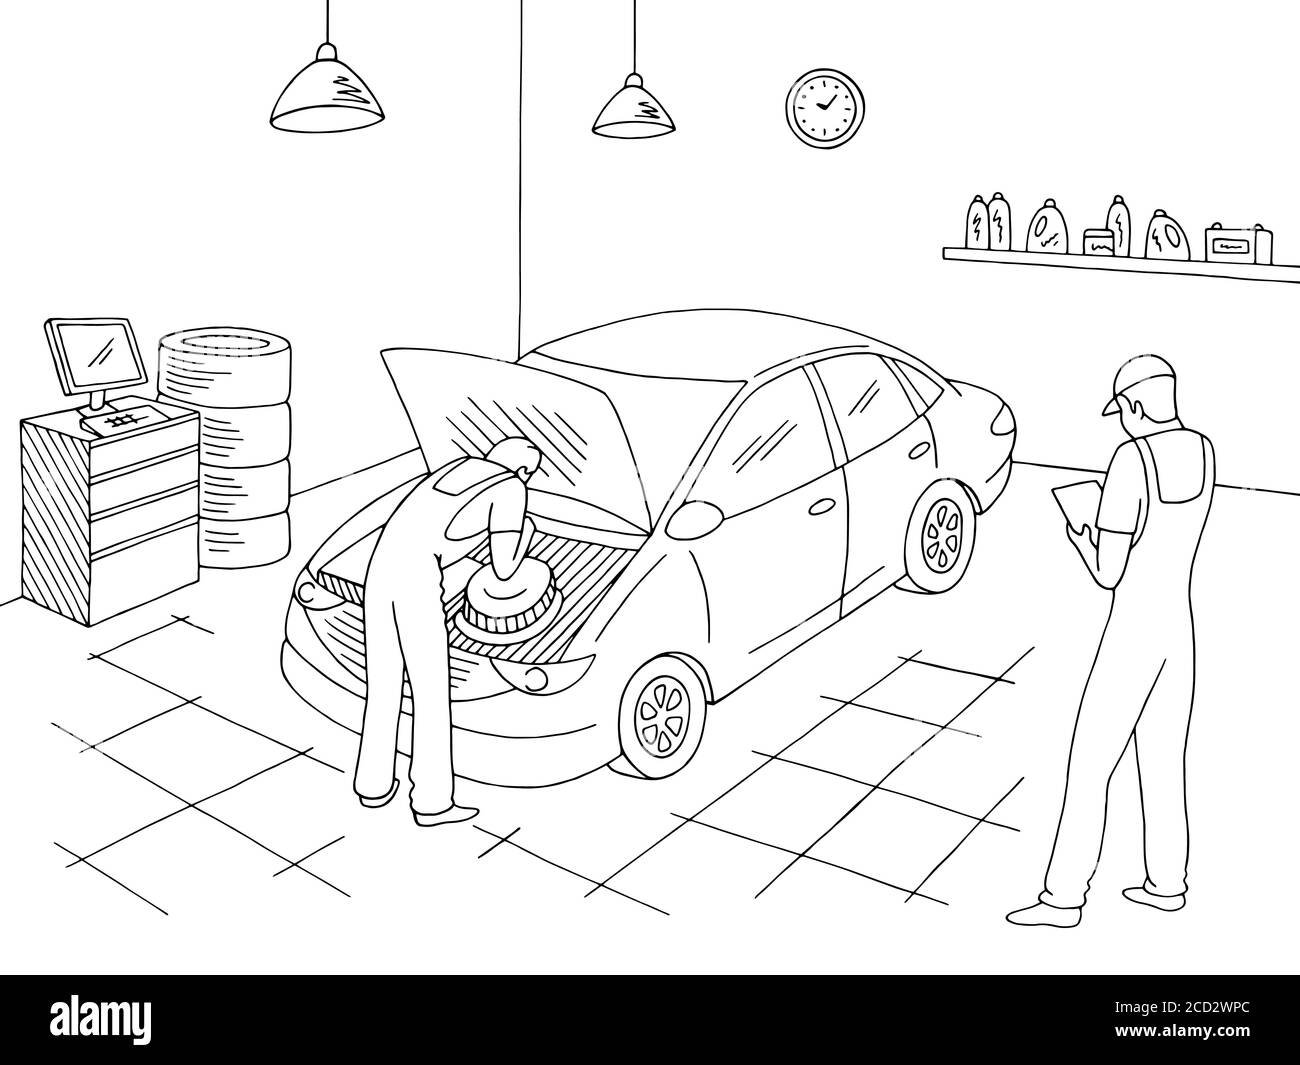 Car service interior graphic black white sketch illustration vector. Workers repair a vehicle Stock Vector